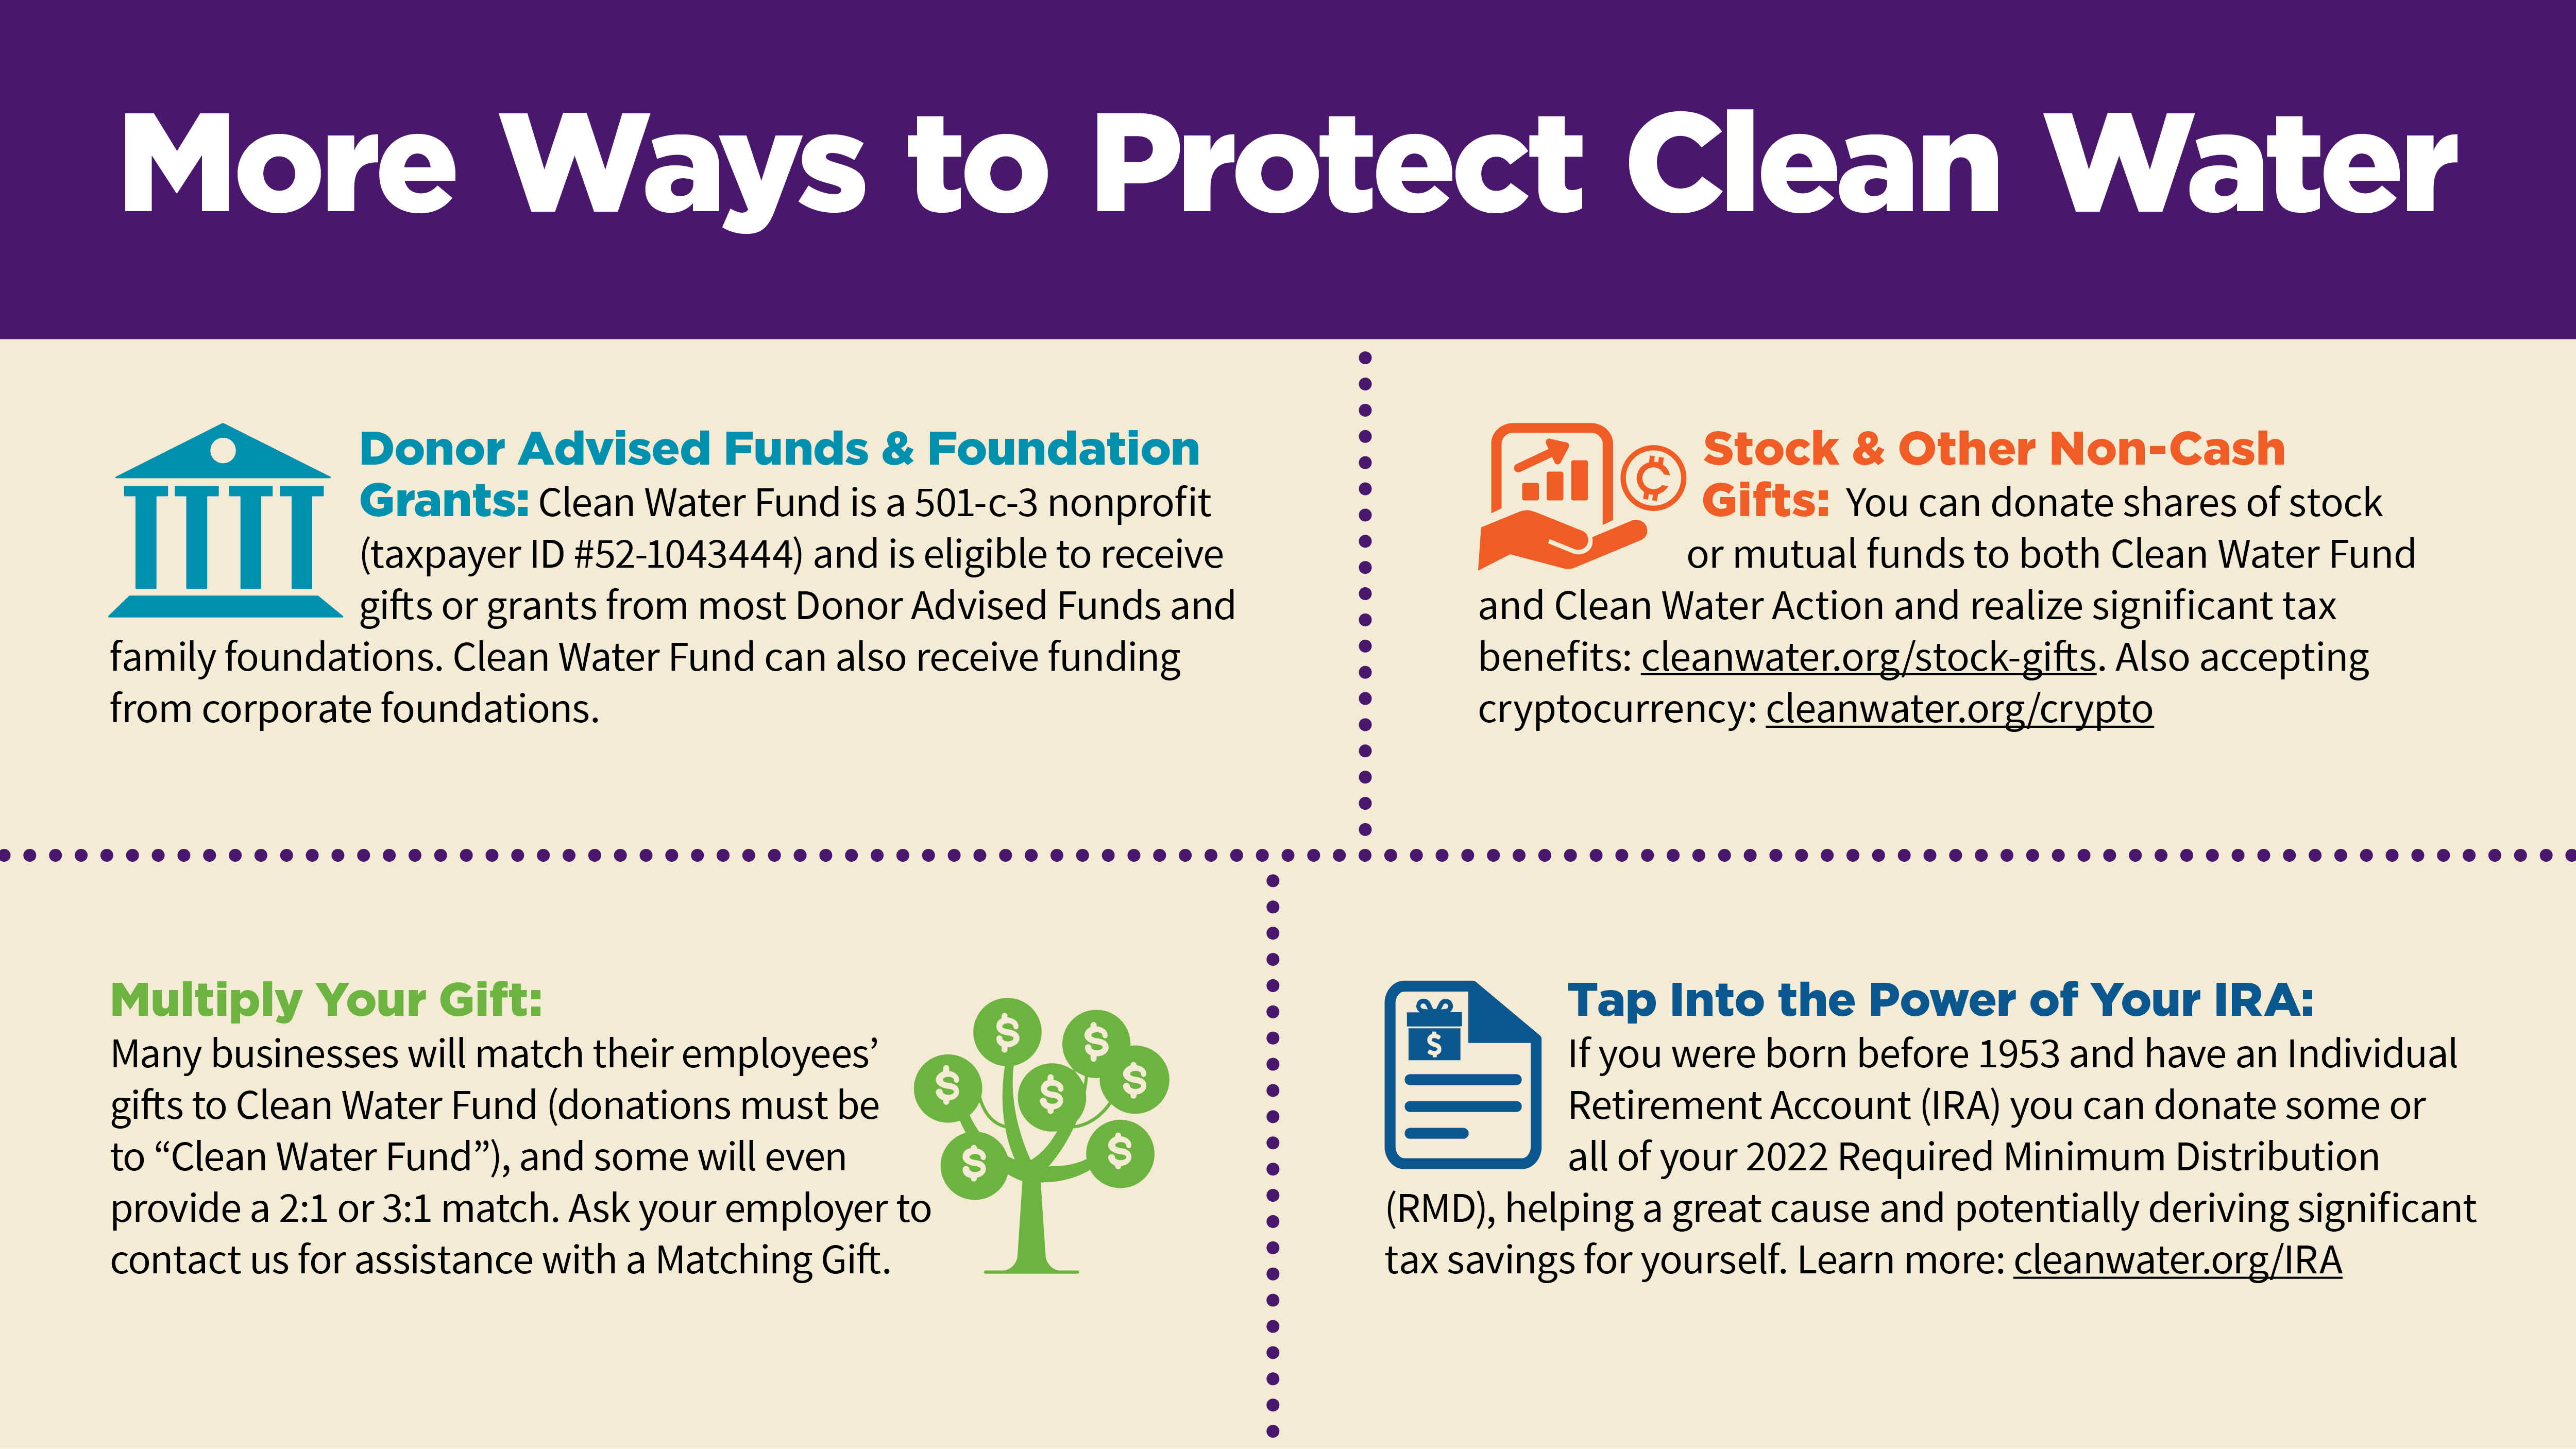 More Ways to Protect Clean Water